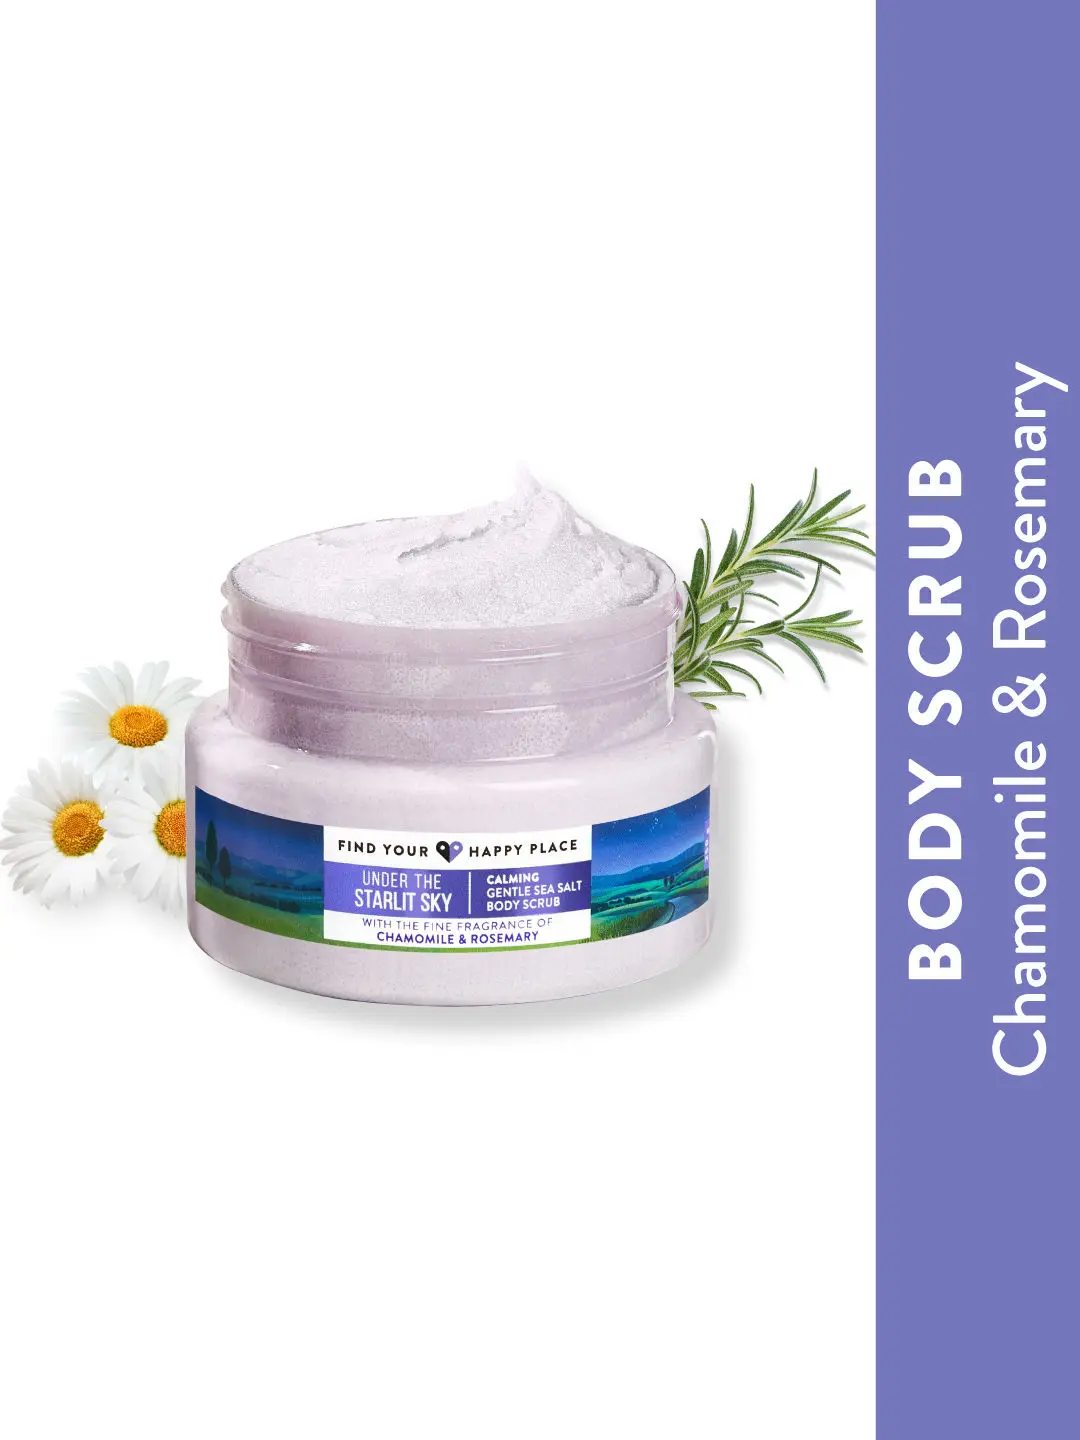 Find Your Happy Place - Under The Starlit Sky Exfoliating Body Scrub Chamomile & Rosemary 250g